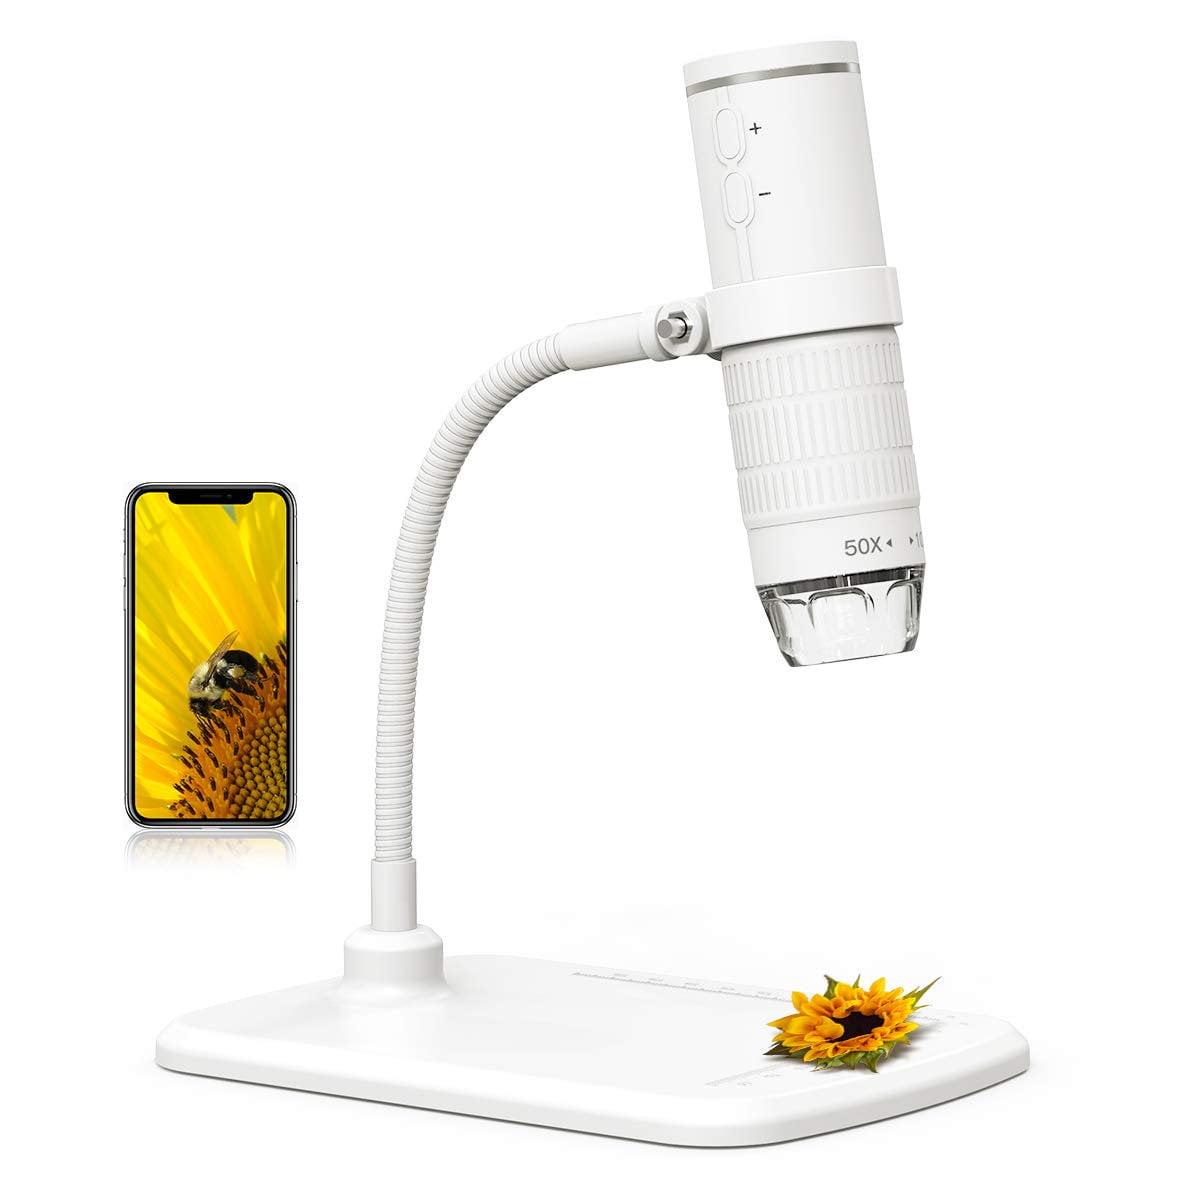 dodocool WiFi Digital Microscope HD 1080P Resolution 50 to 1000x Wireless Magnification Endoscope with LEDs Microscope Camera, Compatible with iOS iPad Android Mac Tablet - Walmart.com